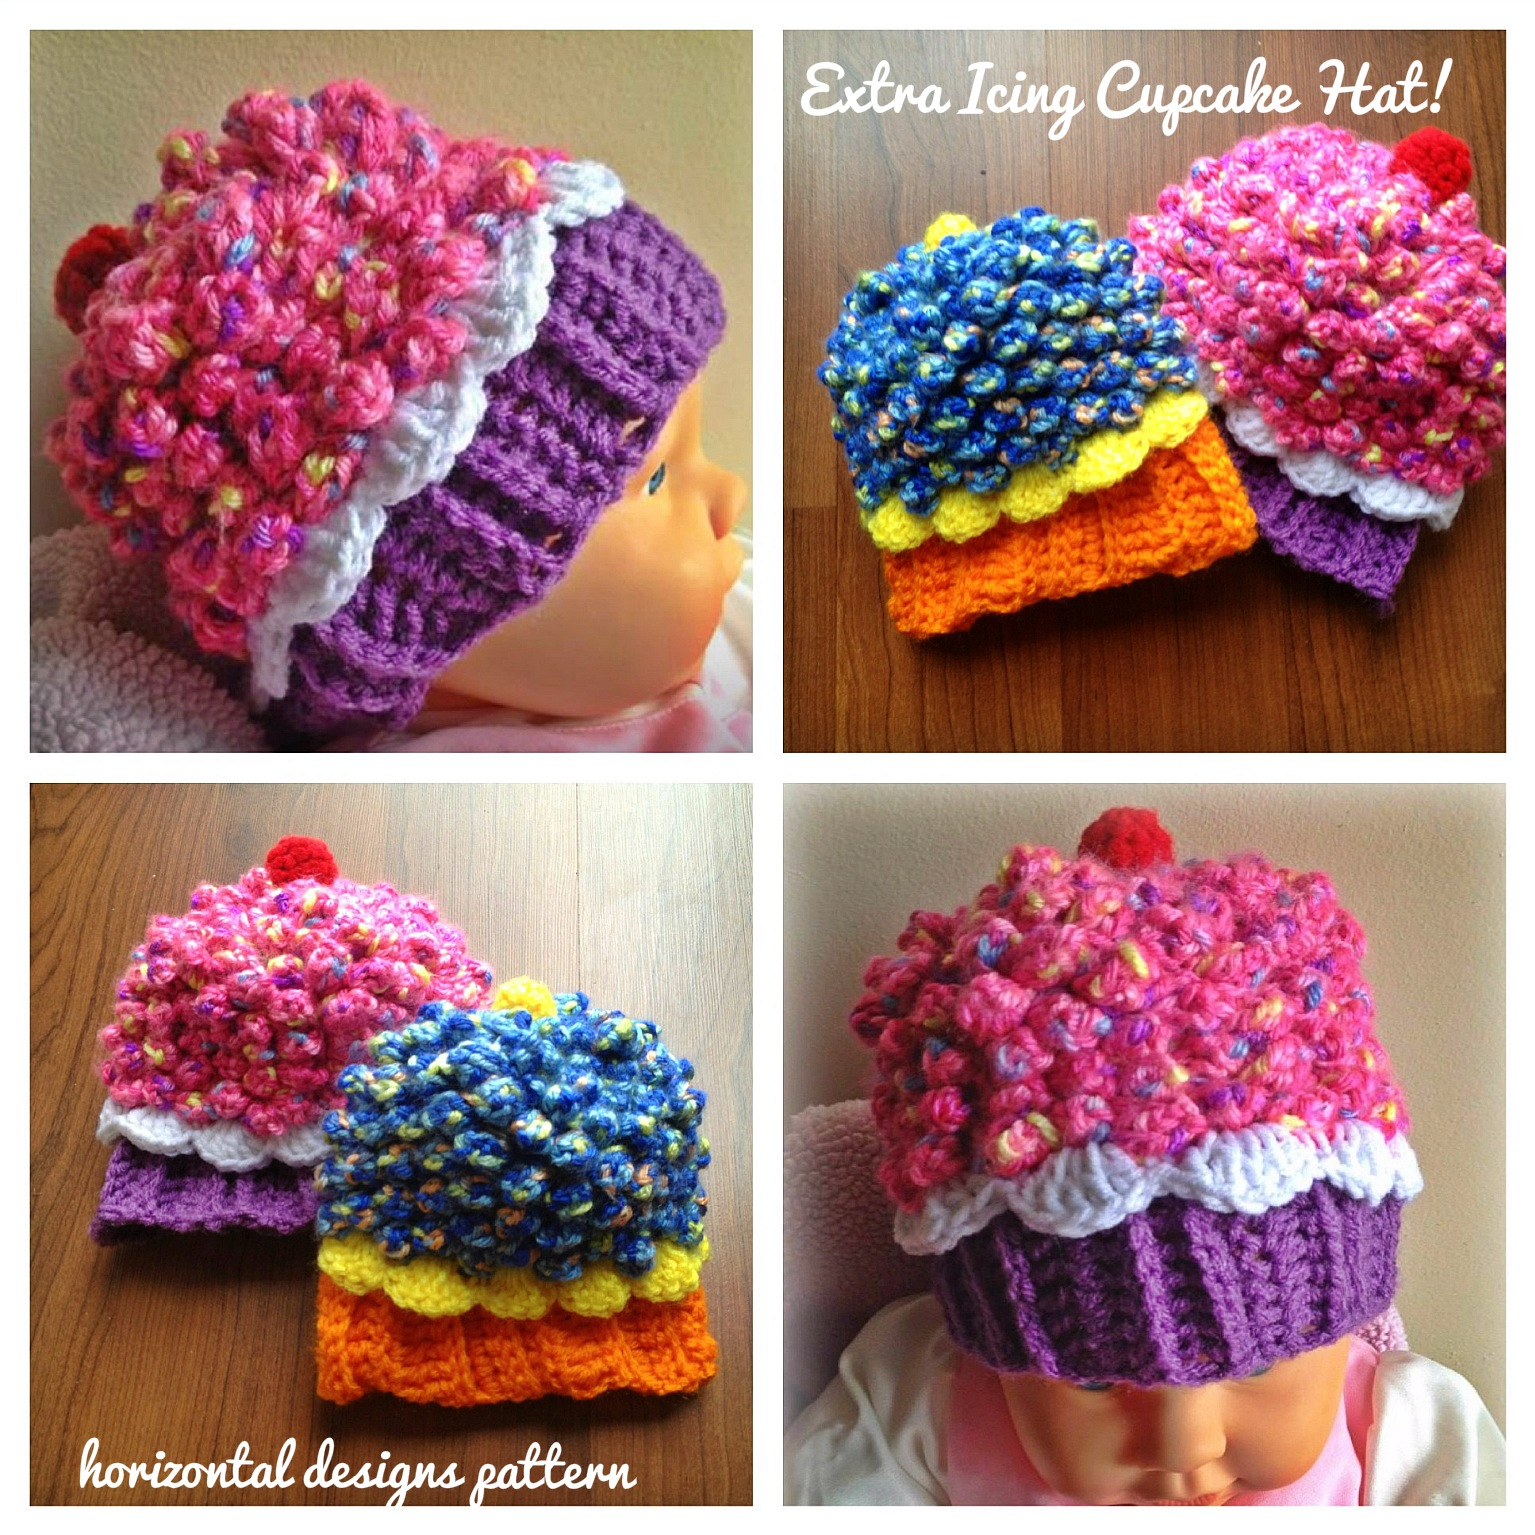 Knitted Cupcake Hat Pattern Studio Create Giveaway Cupcake Hat Extra Icing Pattern Five